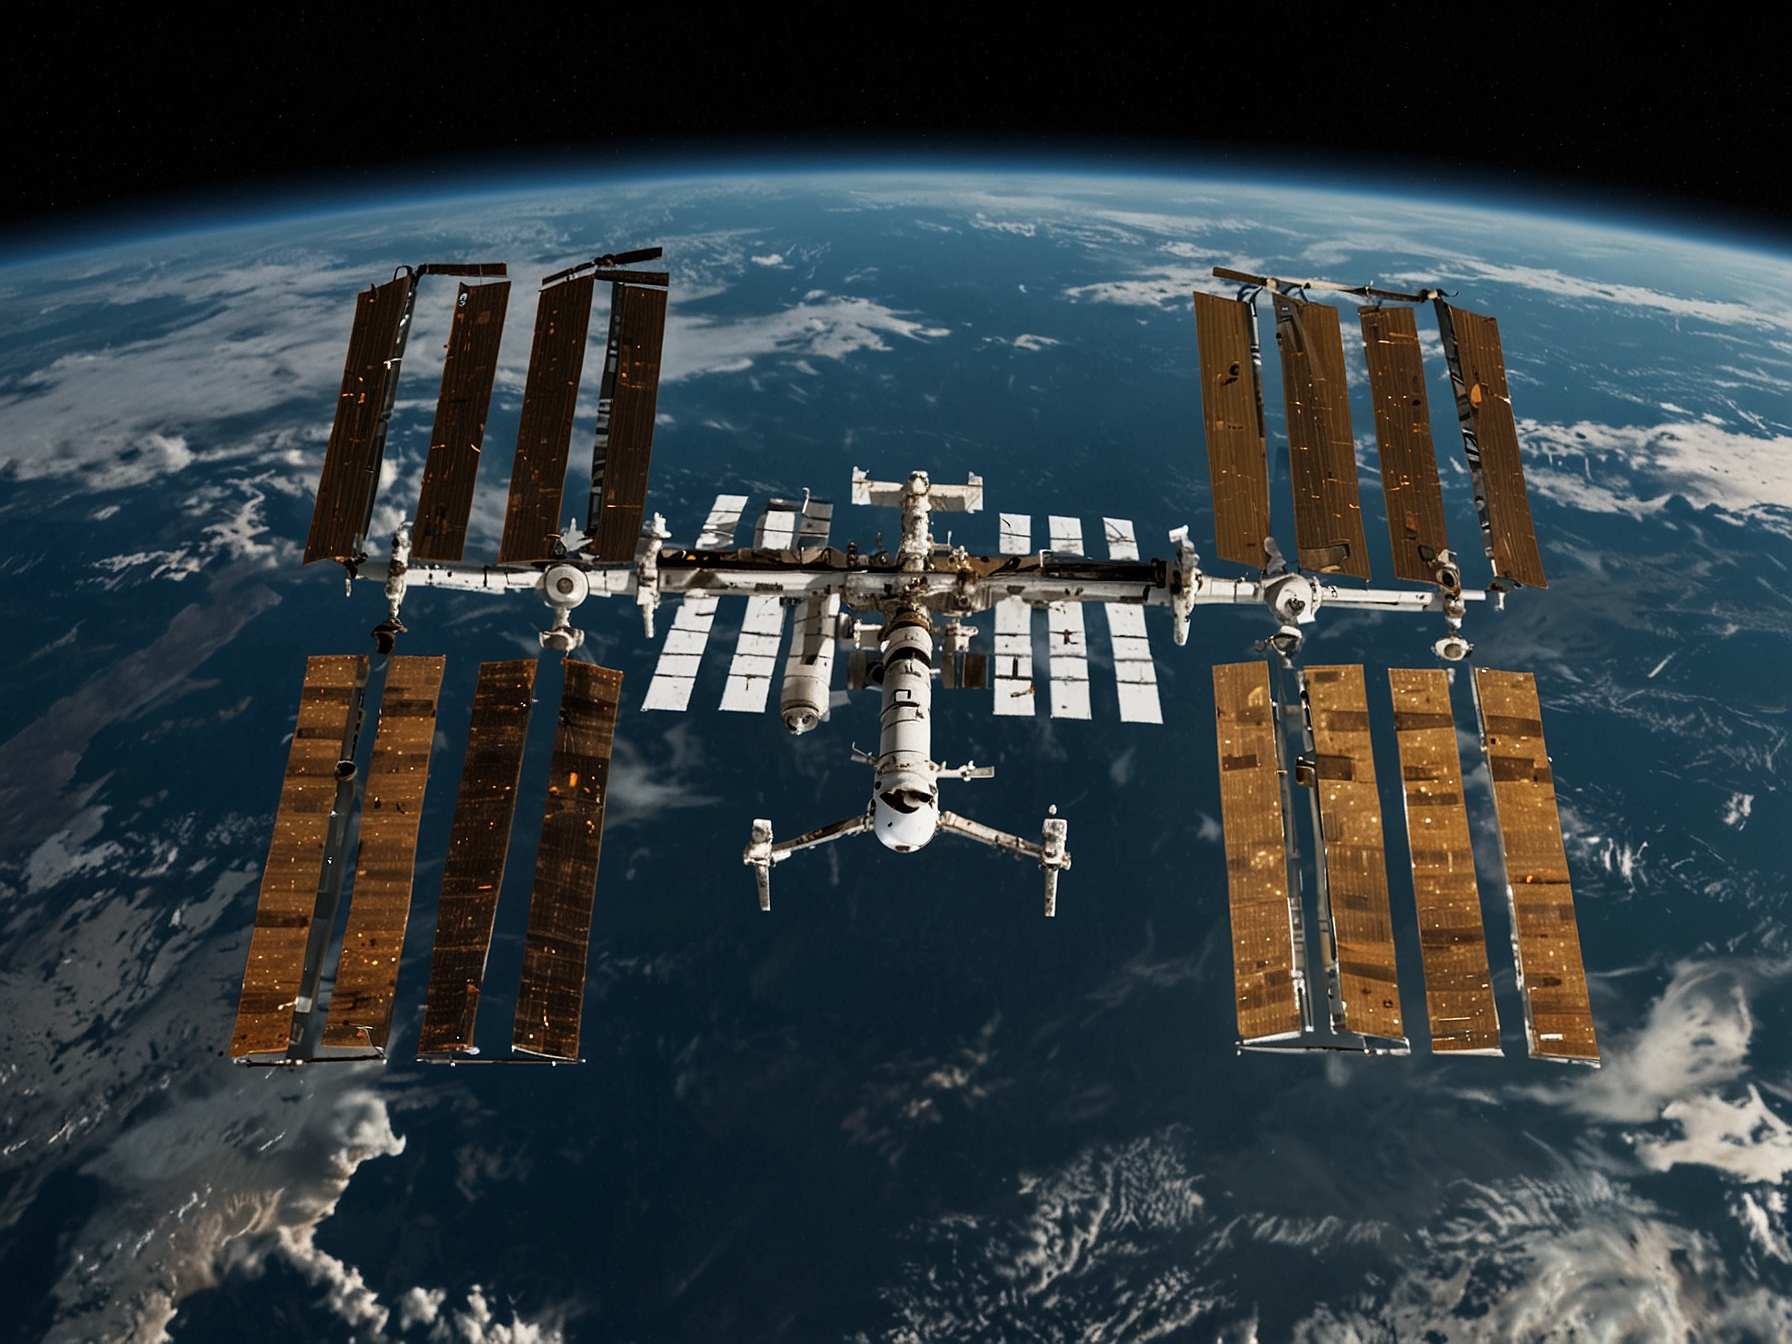 An artist's impression of the International Space Station (ISS) preparing for its controlled descent, surrounded by space, highlighting the end of an era in space exploration.